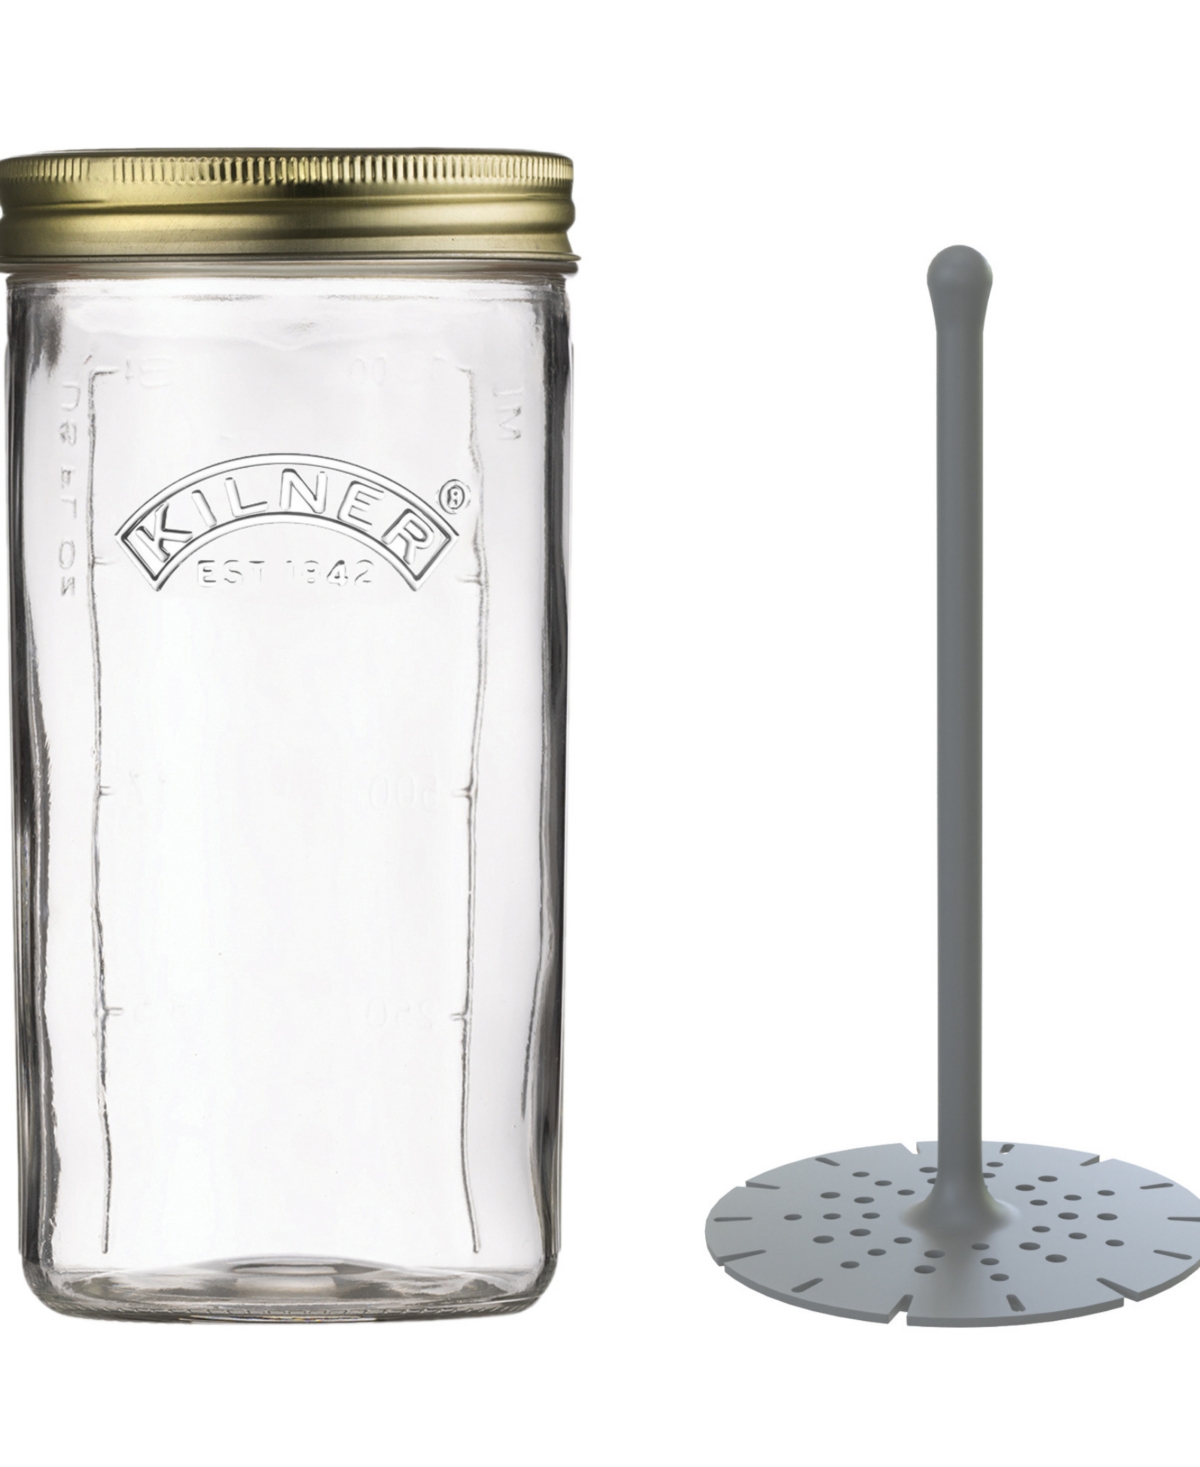 Kilner Pickle Jar With Lifter, 8.66" In Glass